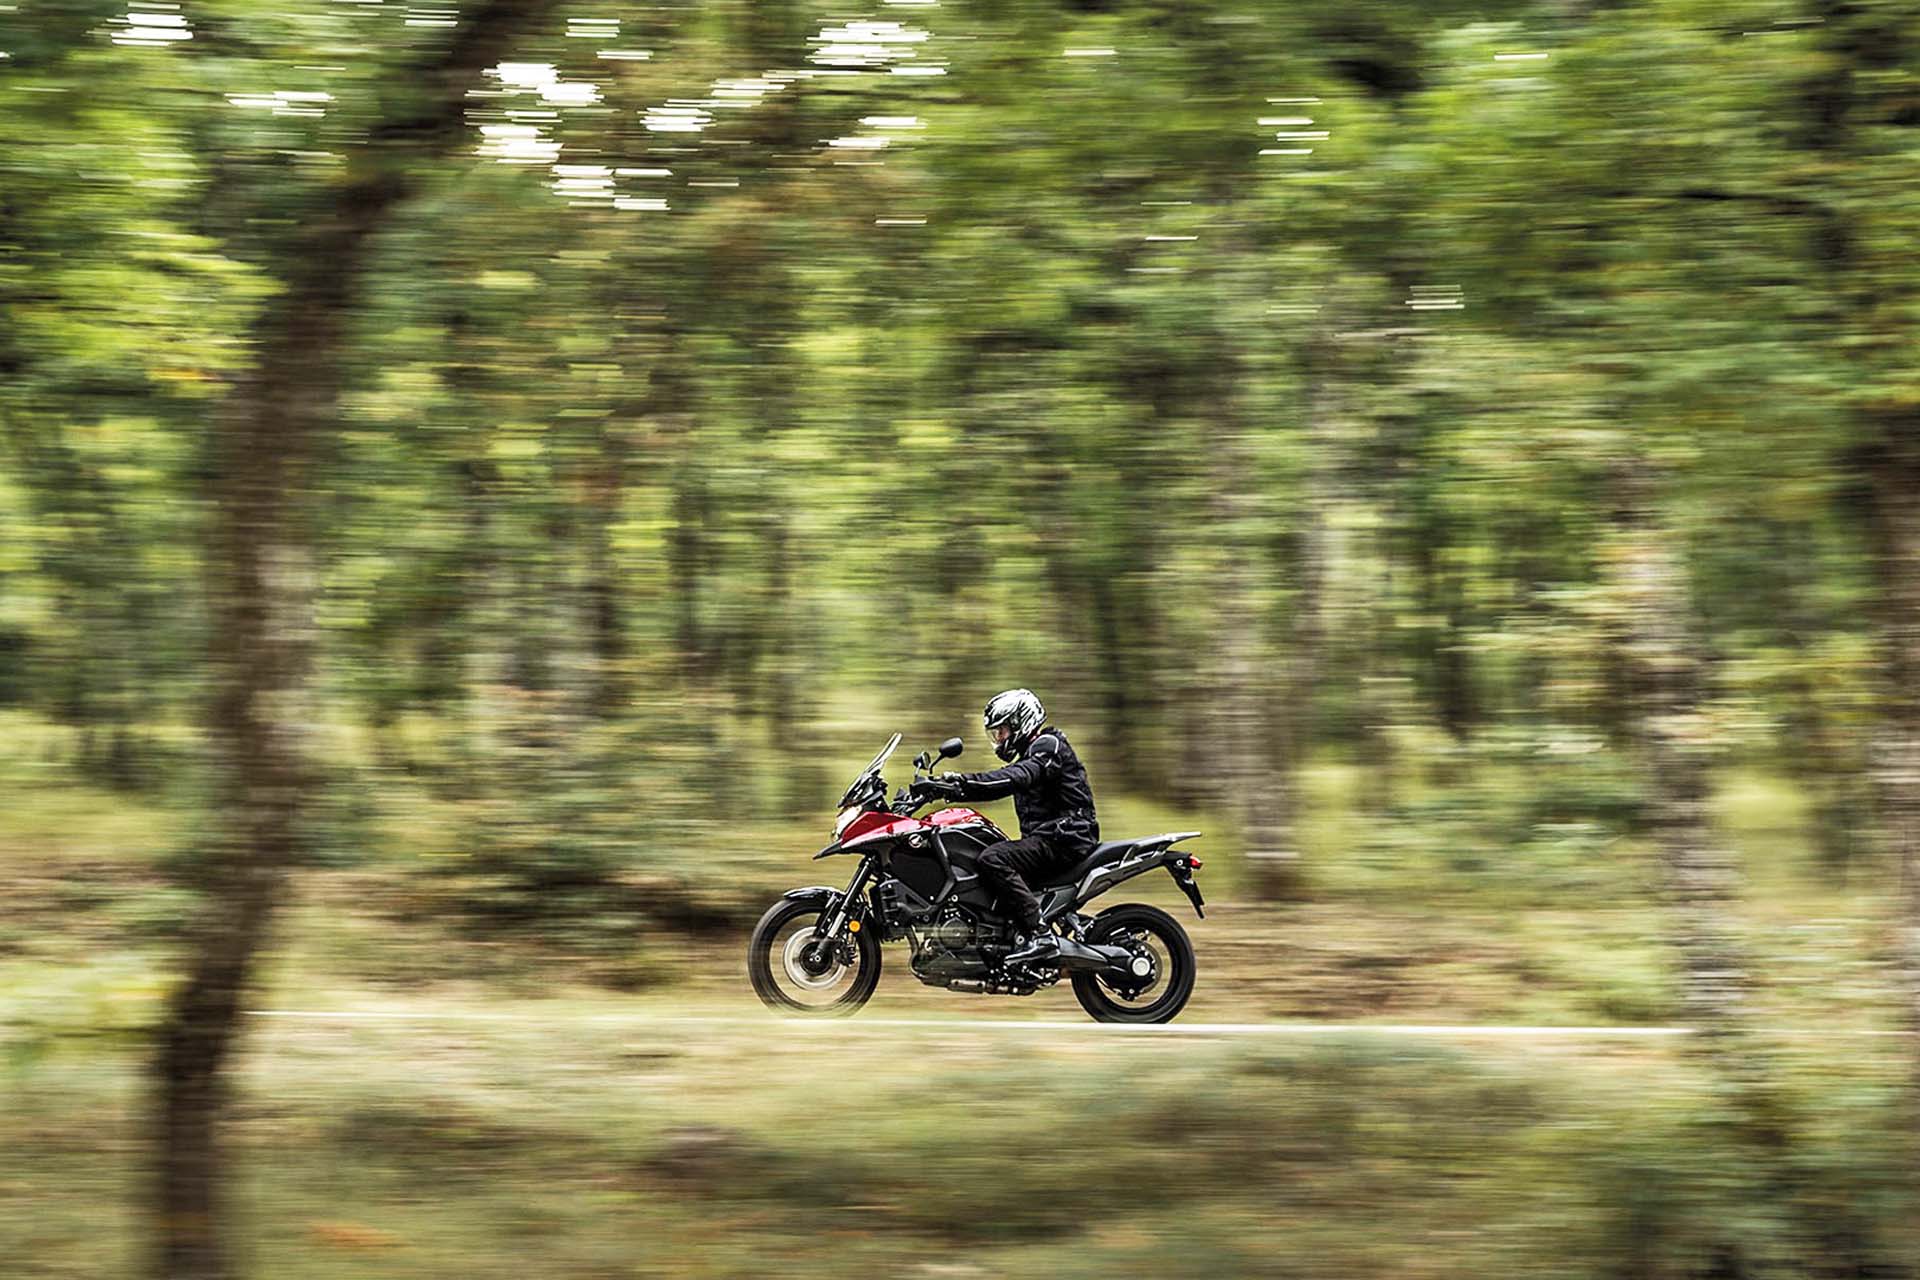 Want something that’s big and gnarly but not quite as off-road intense as the Africa Twin? You still get a DCT but the VFR1200X gets shaft drive and the VFR1200’s 1,237cc V4 engine. A suite of storage accessories and heater grips, plus power sockets for GPR, etc. make this an Iron-butt’s dream long-distance explorer.